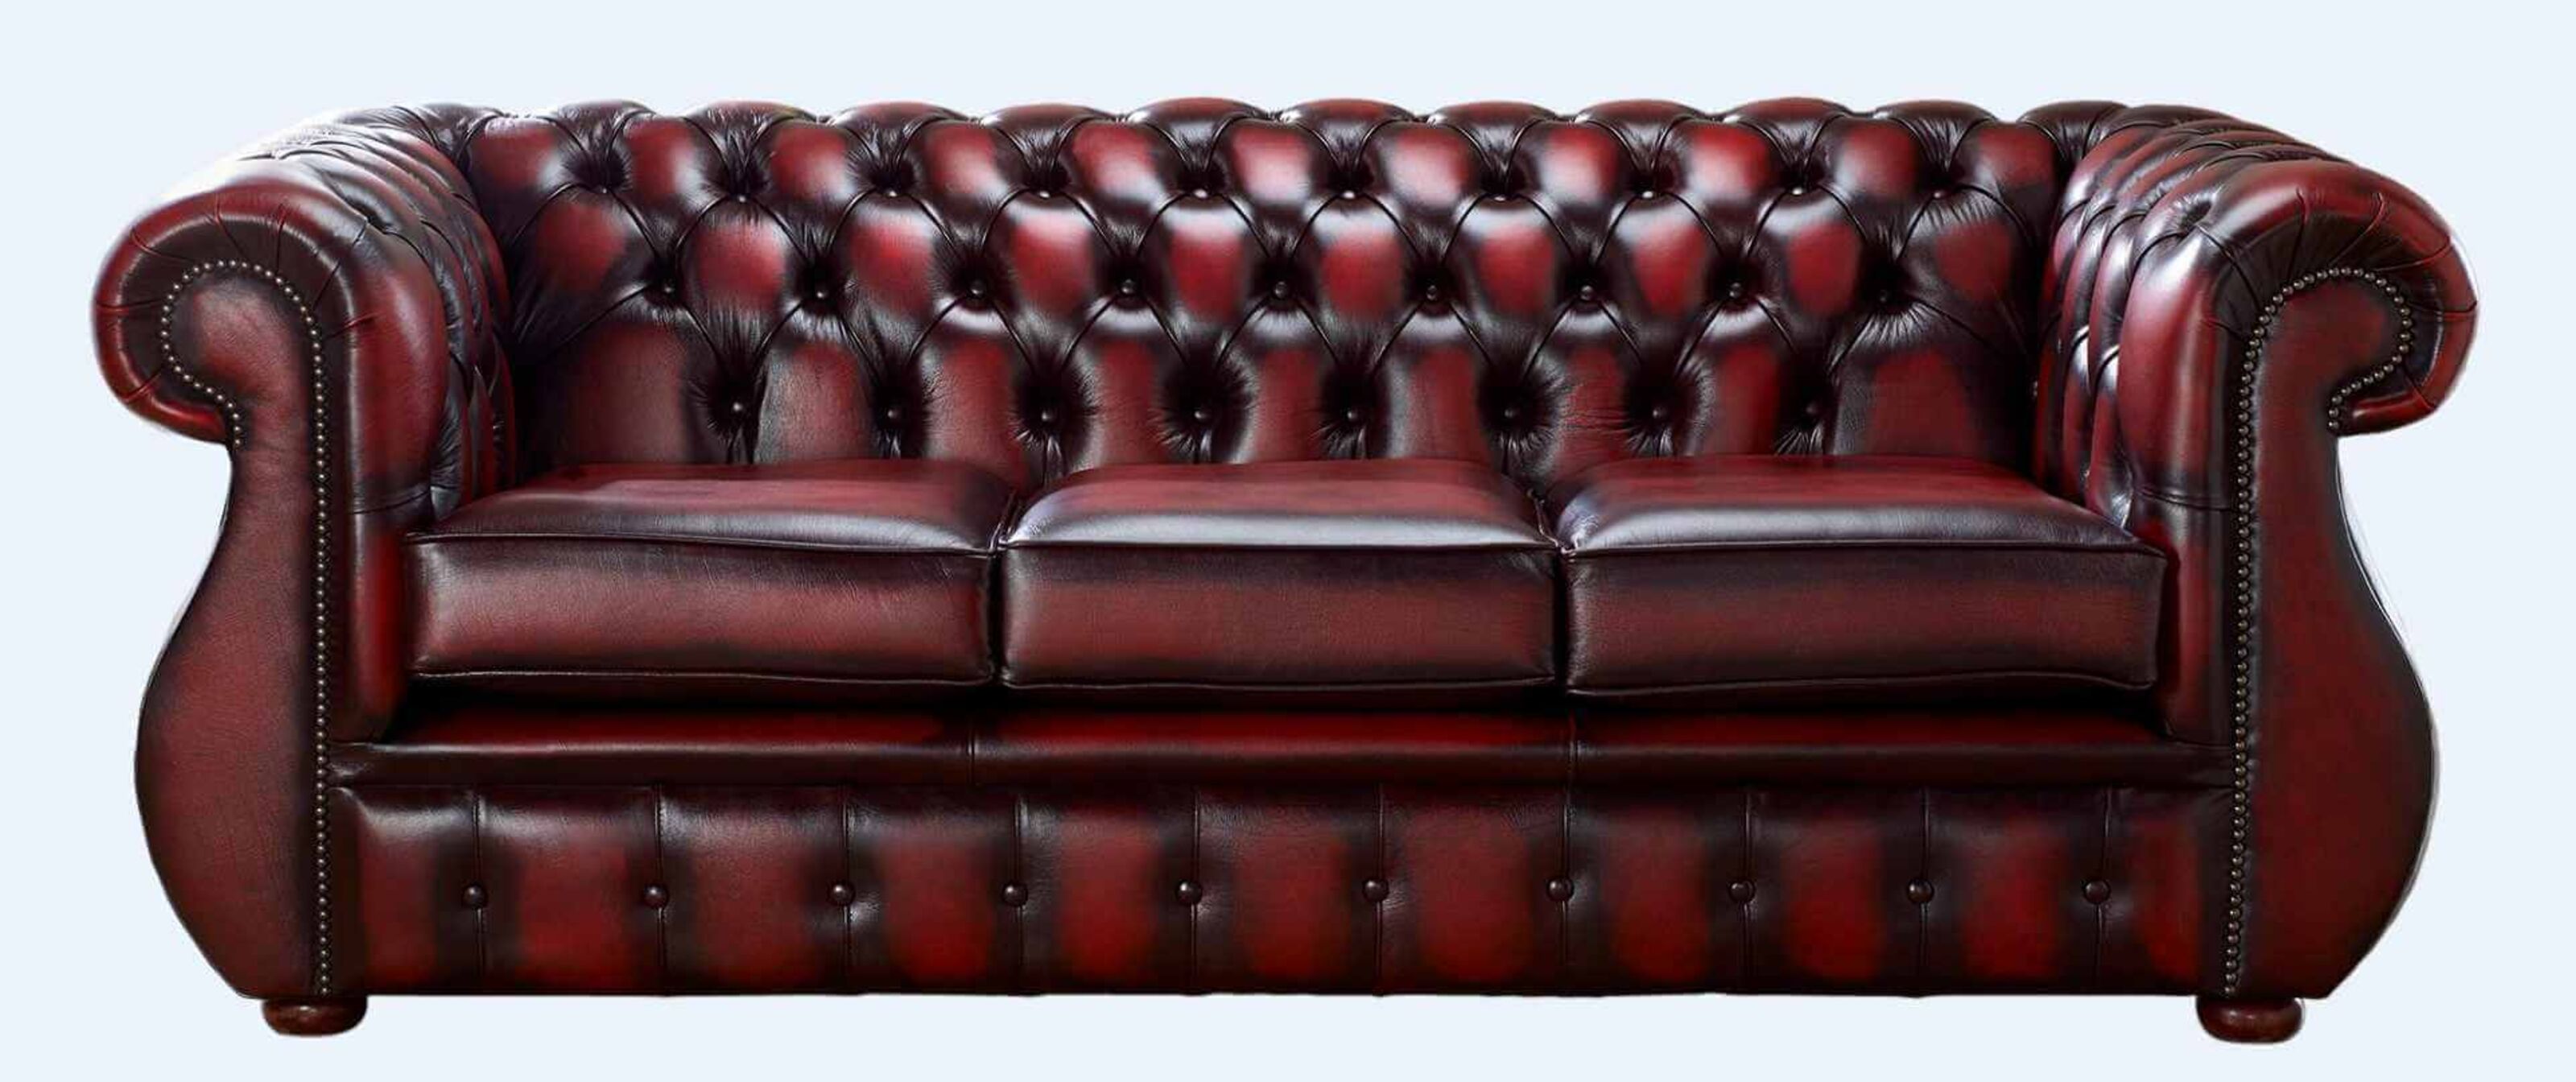 Seat Savvy Honest Assessments of Chesterfield Sofa Manufacturers  %Post Title